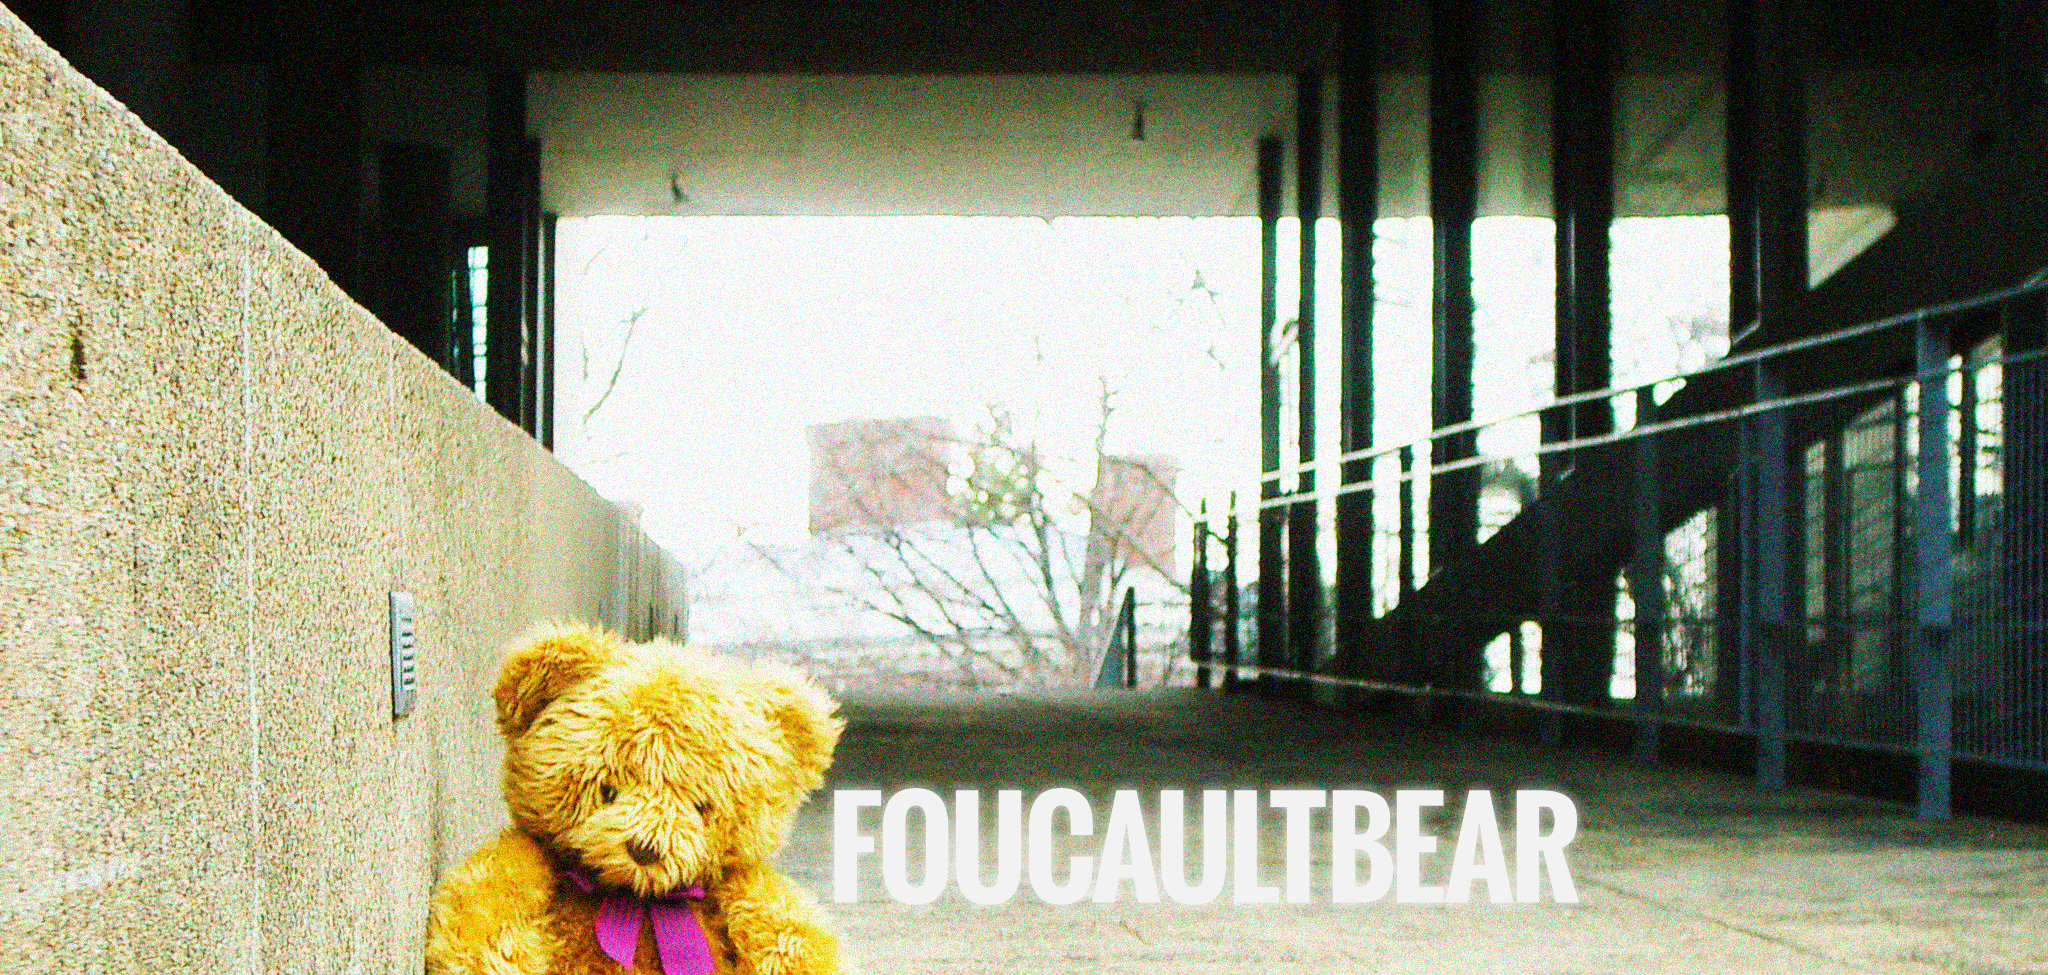 Welcome to foucaultbear's little world of luxury. A delightful selection of luxuries for you and your loved ones. Handmade Hair Bows Clips, Handscrafted Jewelry, Clay Art, and others. Flat rate shipping and free shipping on qualifying order amounts.